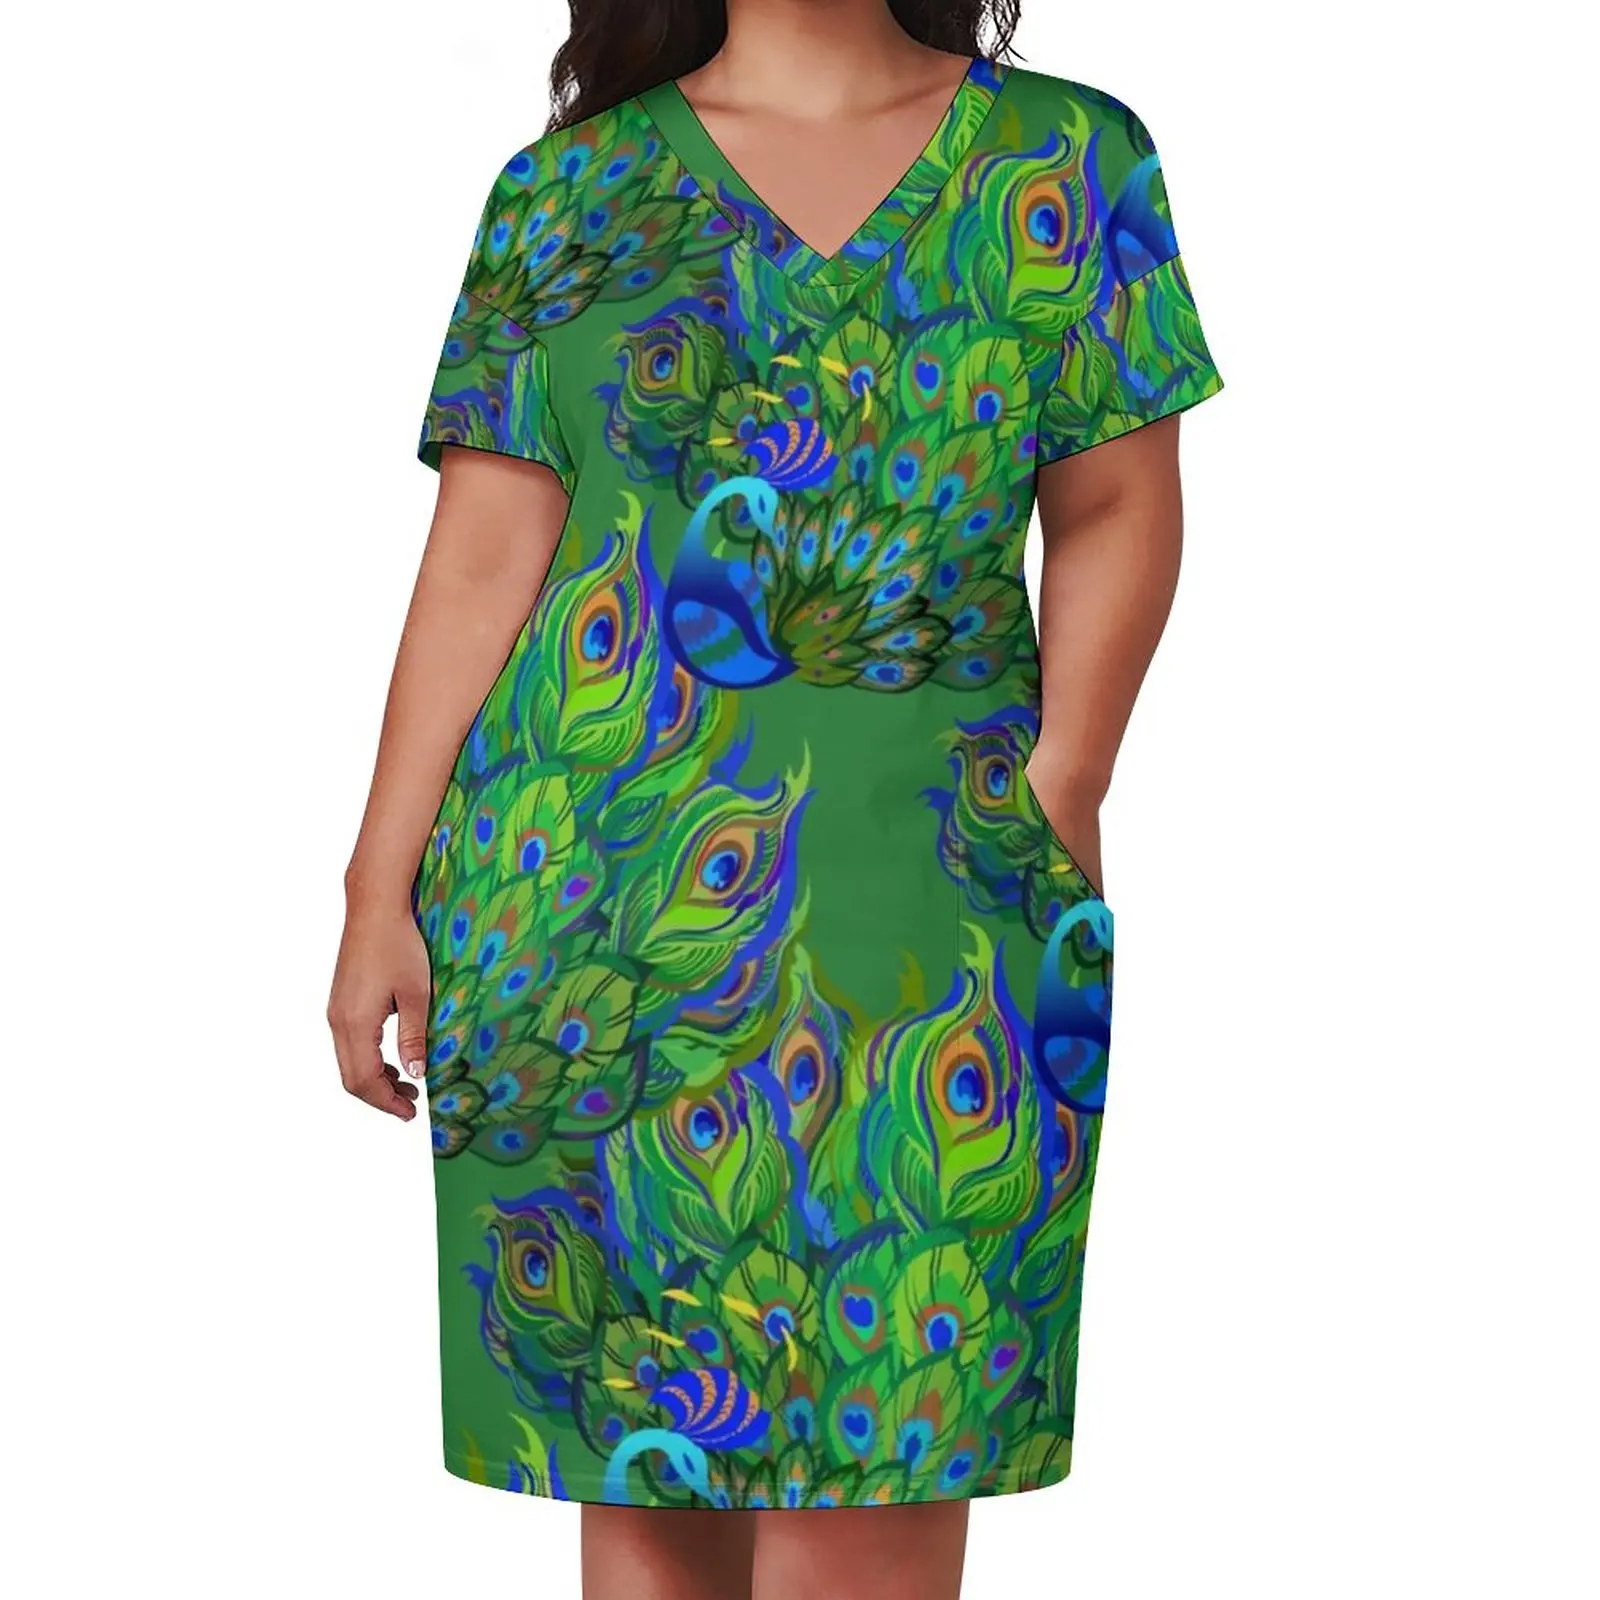 

Peacock Feathers Print Dress Plus Size Blue Green Animal Aesthetic Casual Dress Ladies Summer V Neck Sexy Dresses Gift Idea